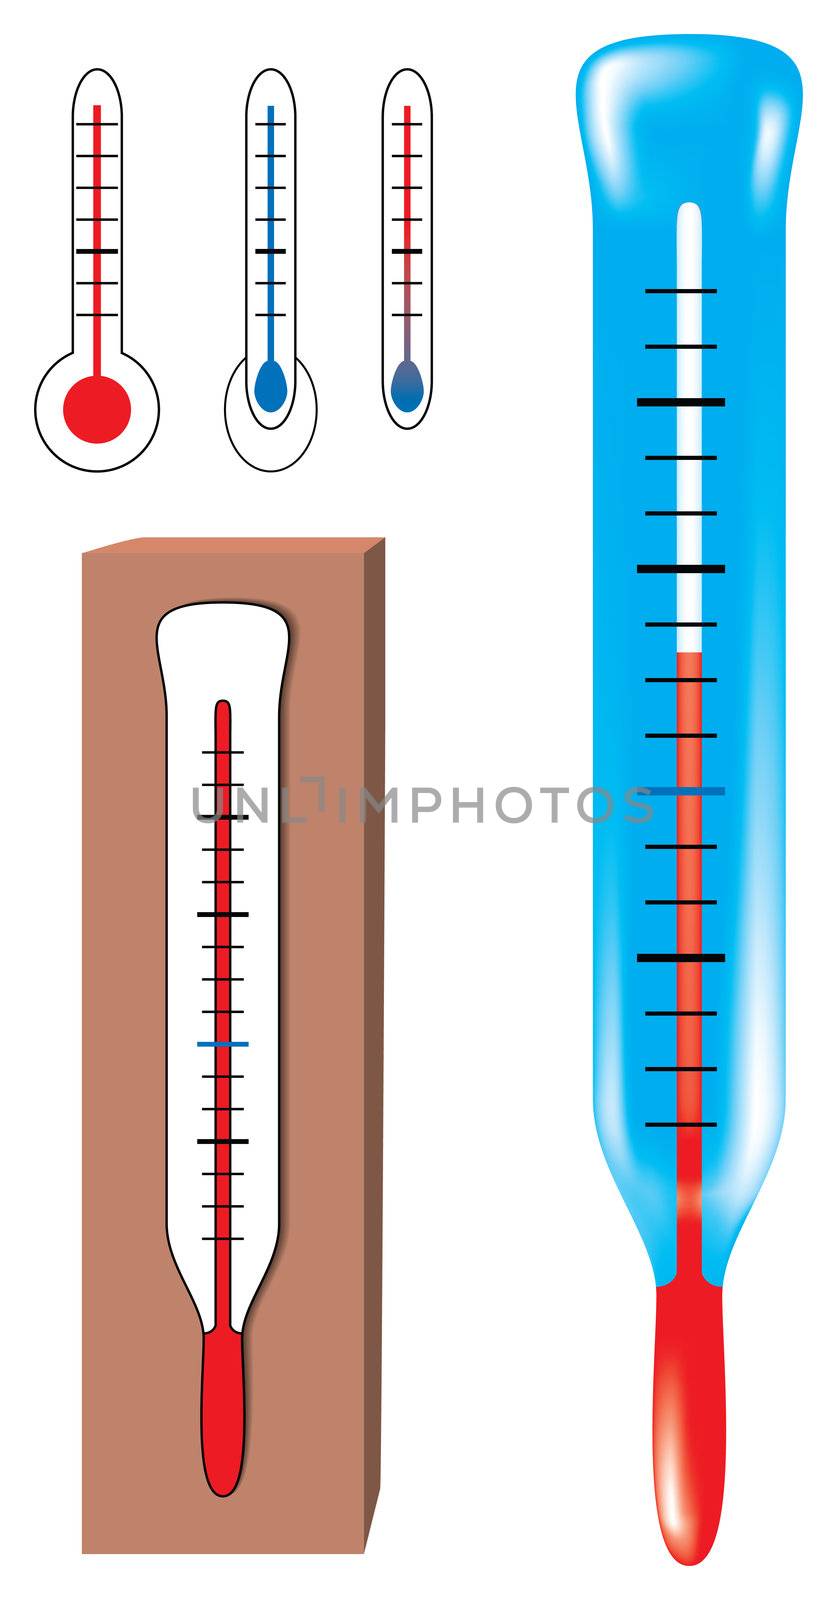 Set of vector thermometers. Uses gradient mesh for the blue thermometer.